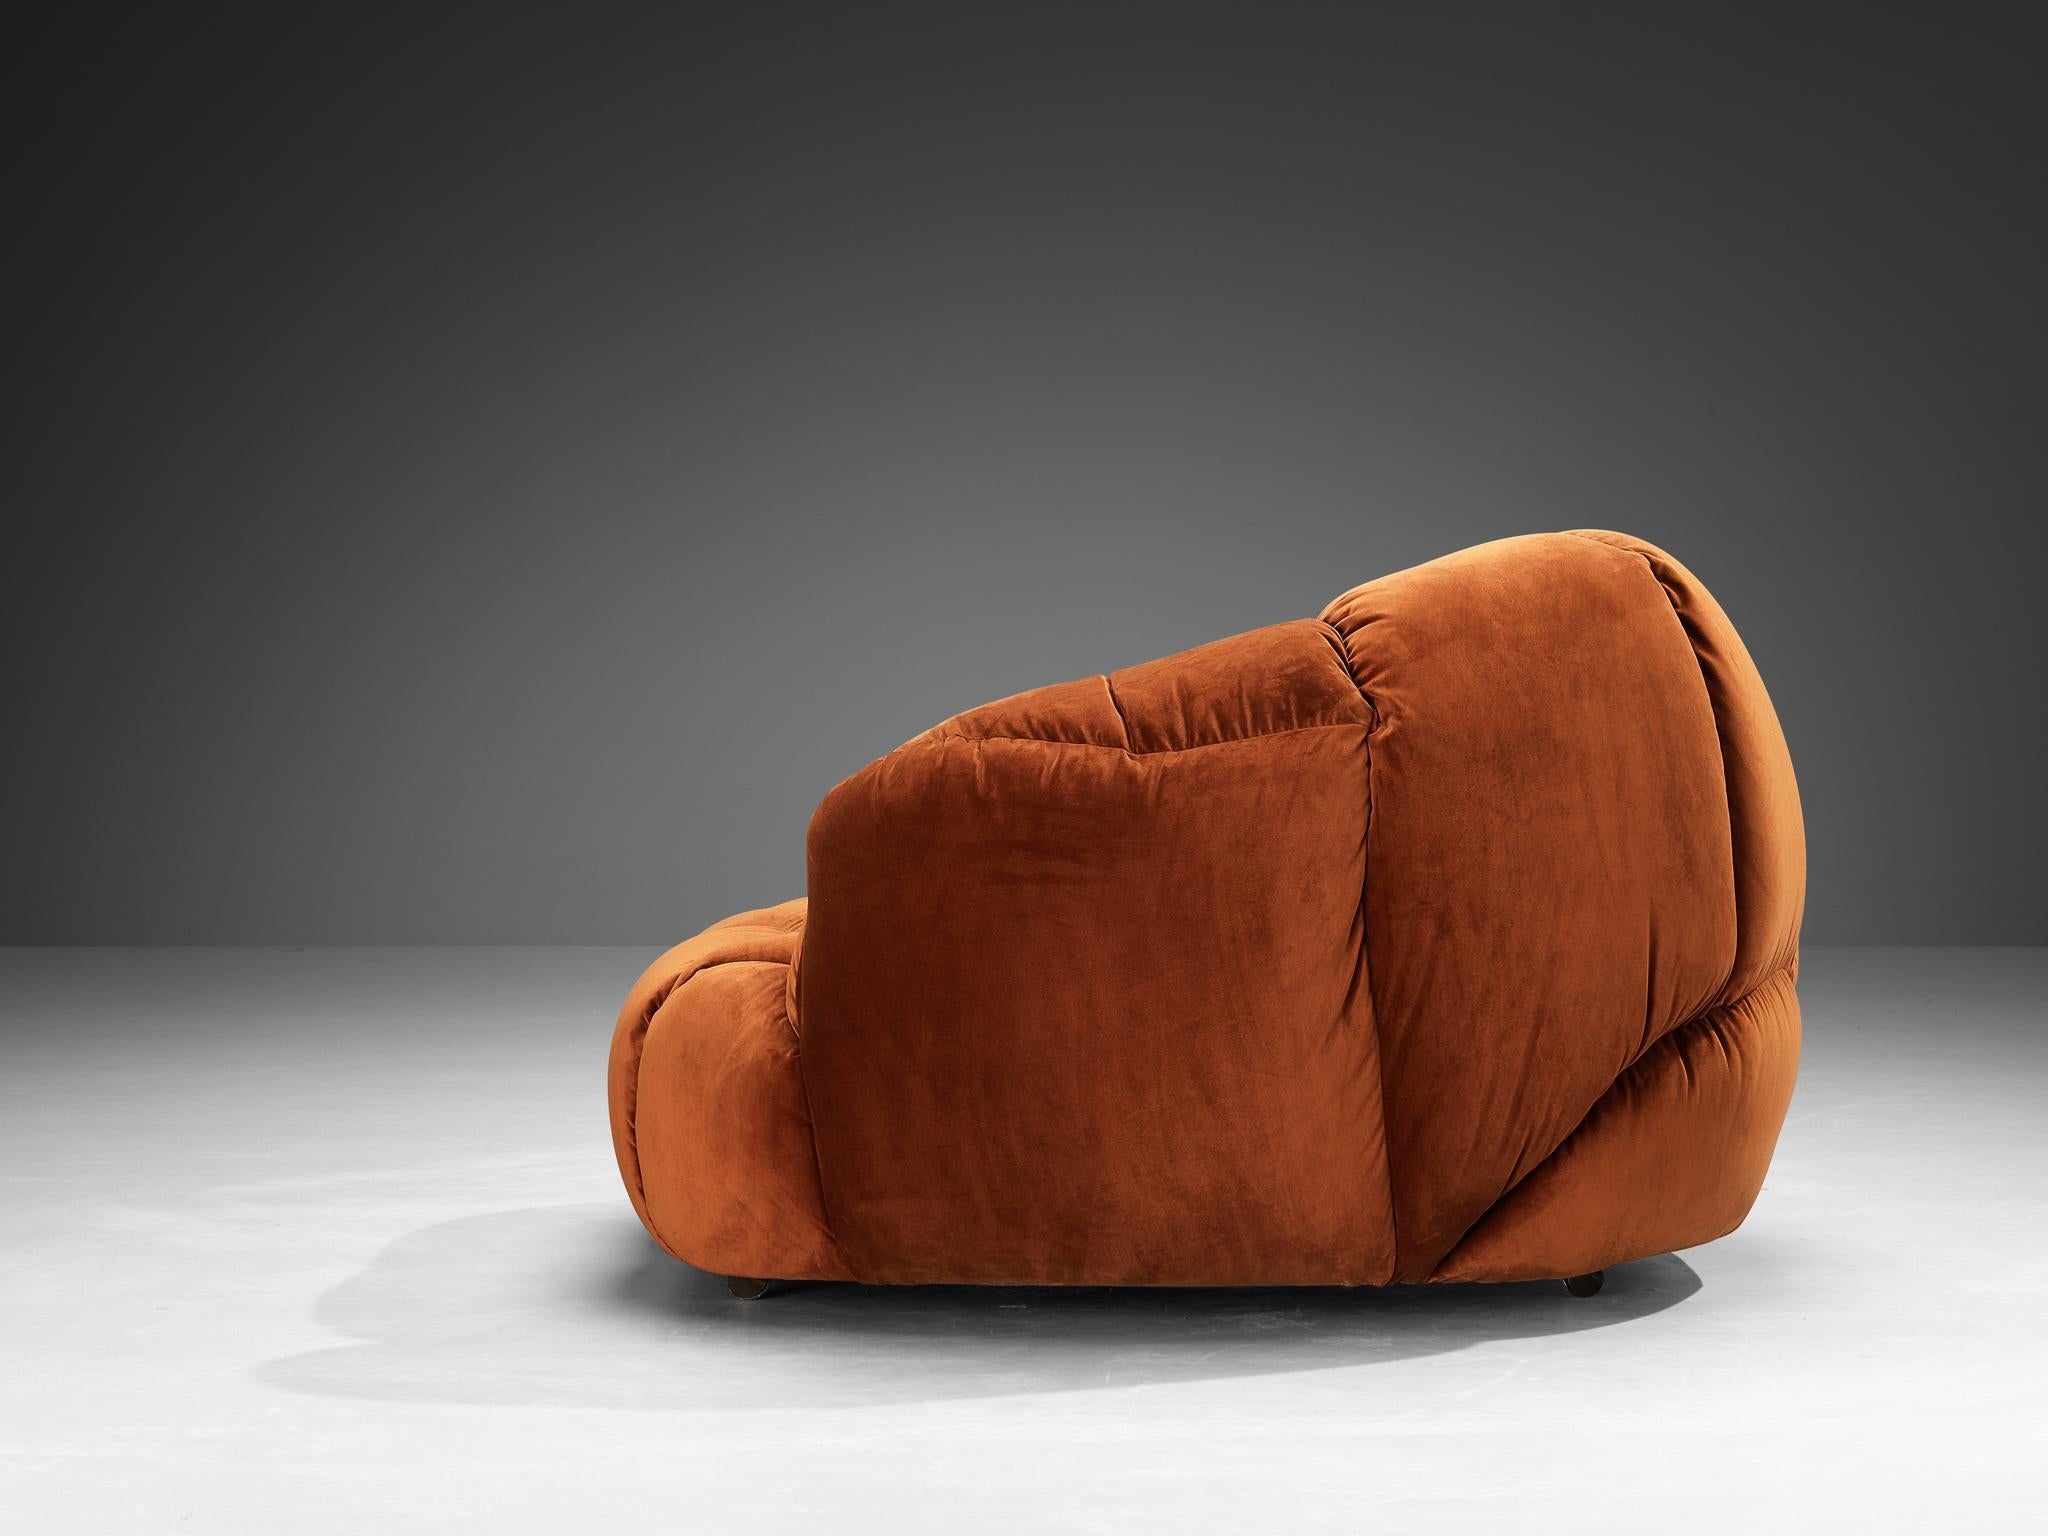 Howard Keith 'Cloud' Lounge Chair with Ottoman in Orange Brown Velvet